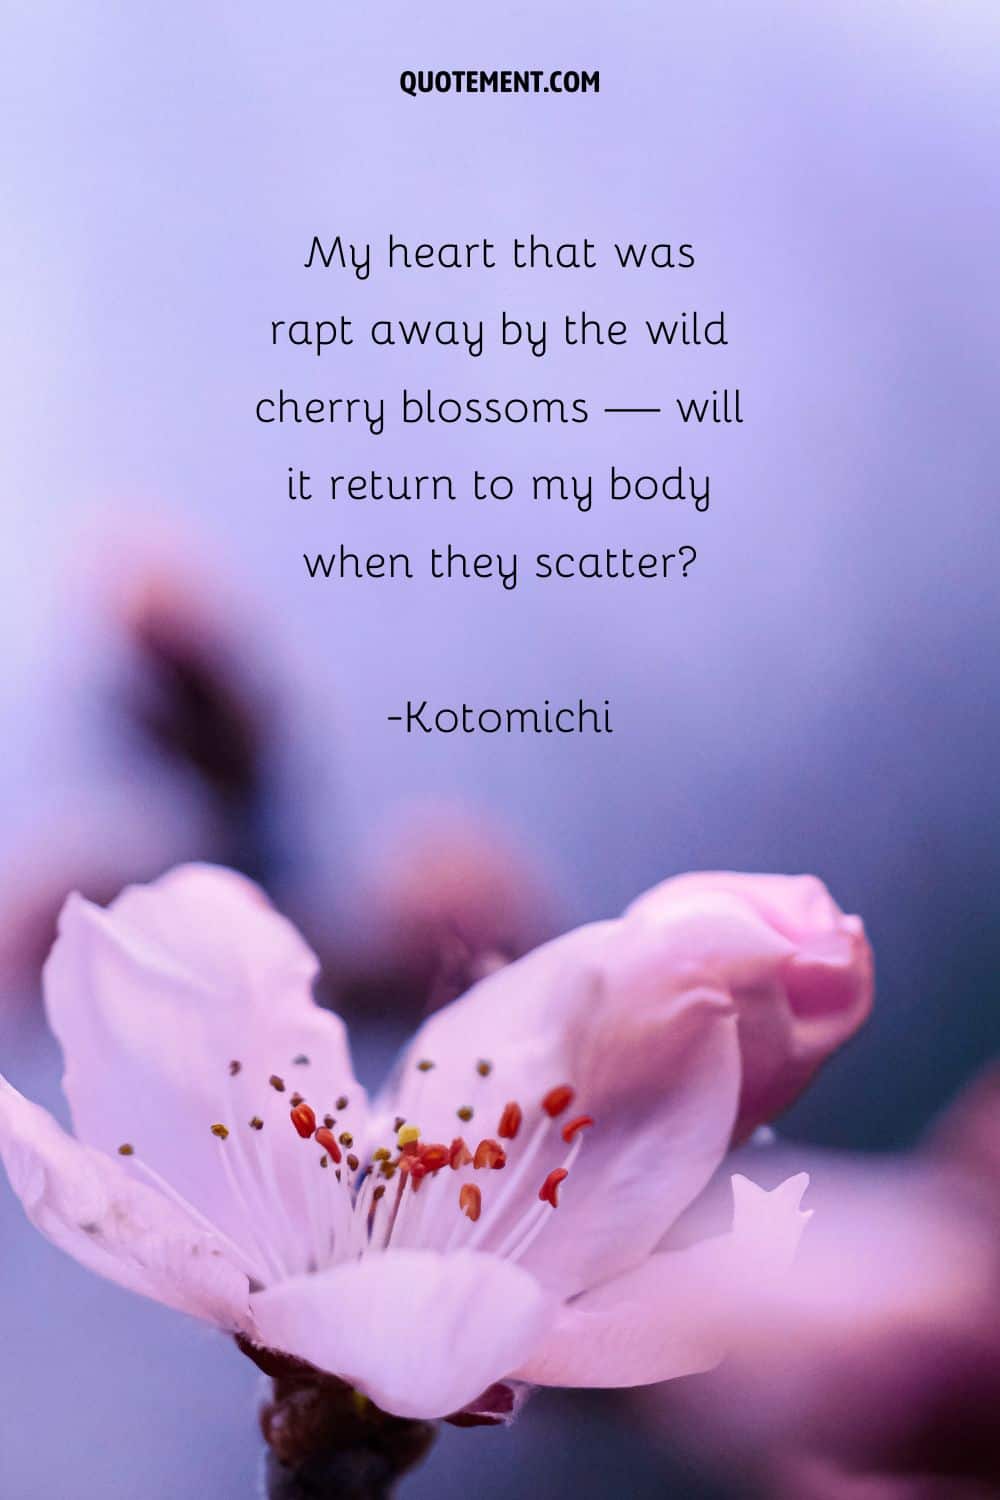 My heart that was rapt away by the wild cherry blossoms — will it return to my body when they scatter